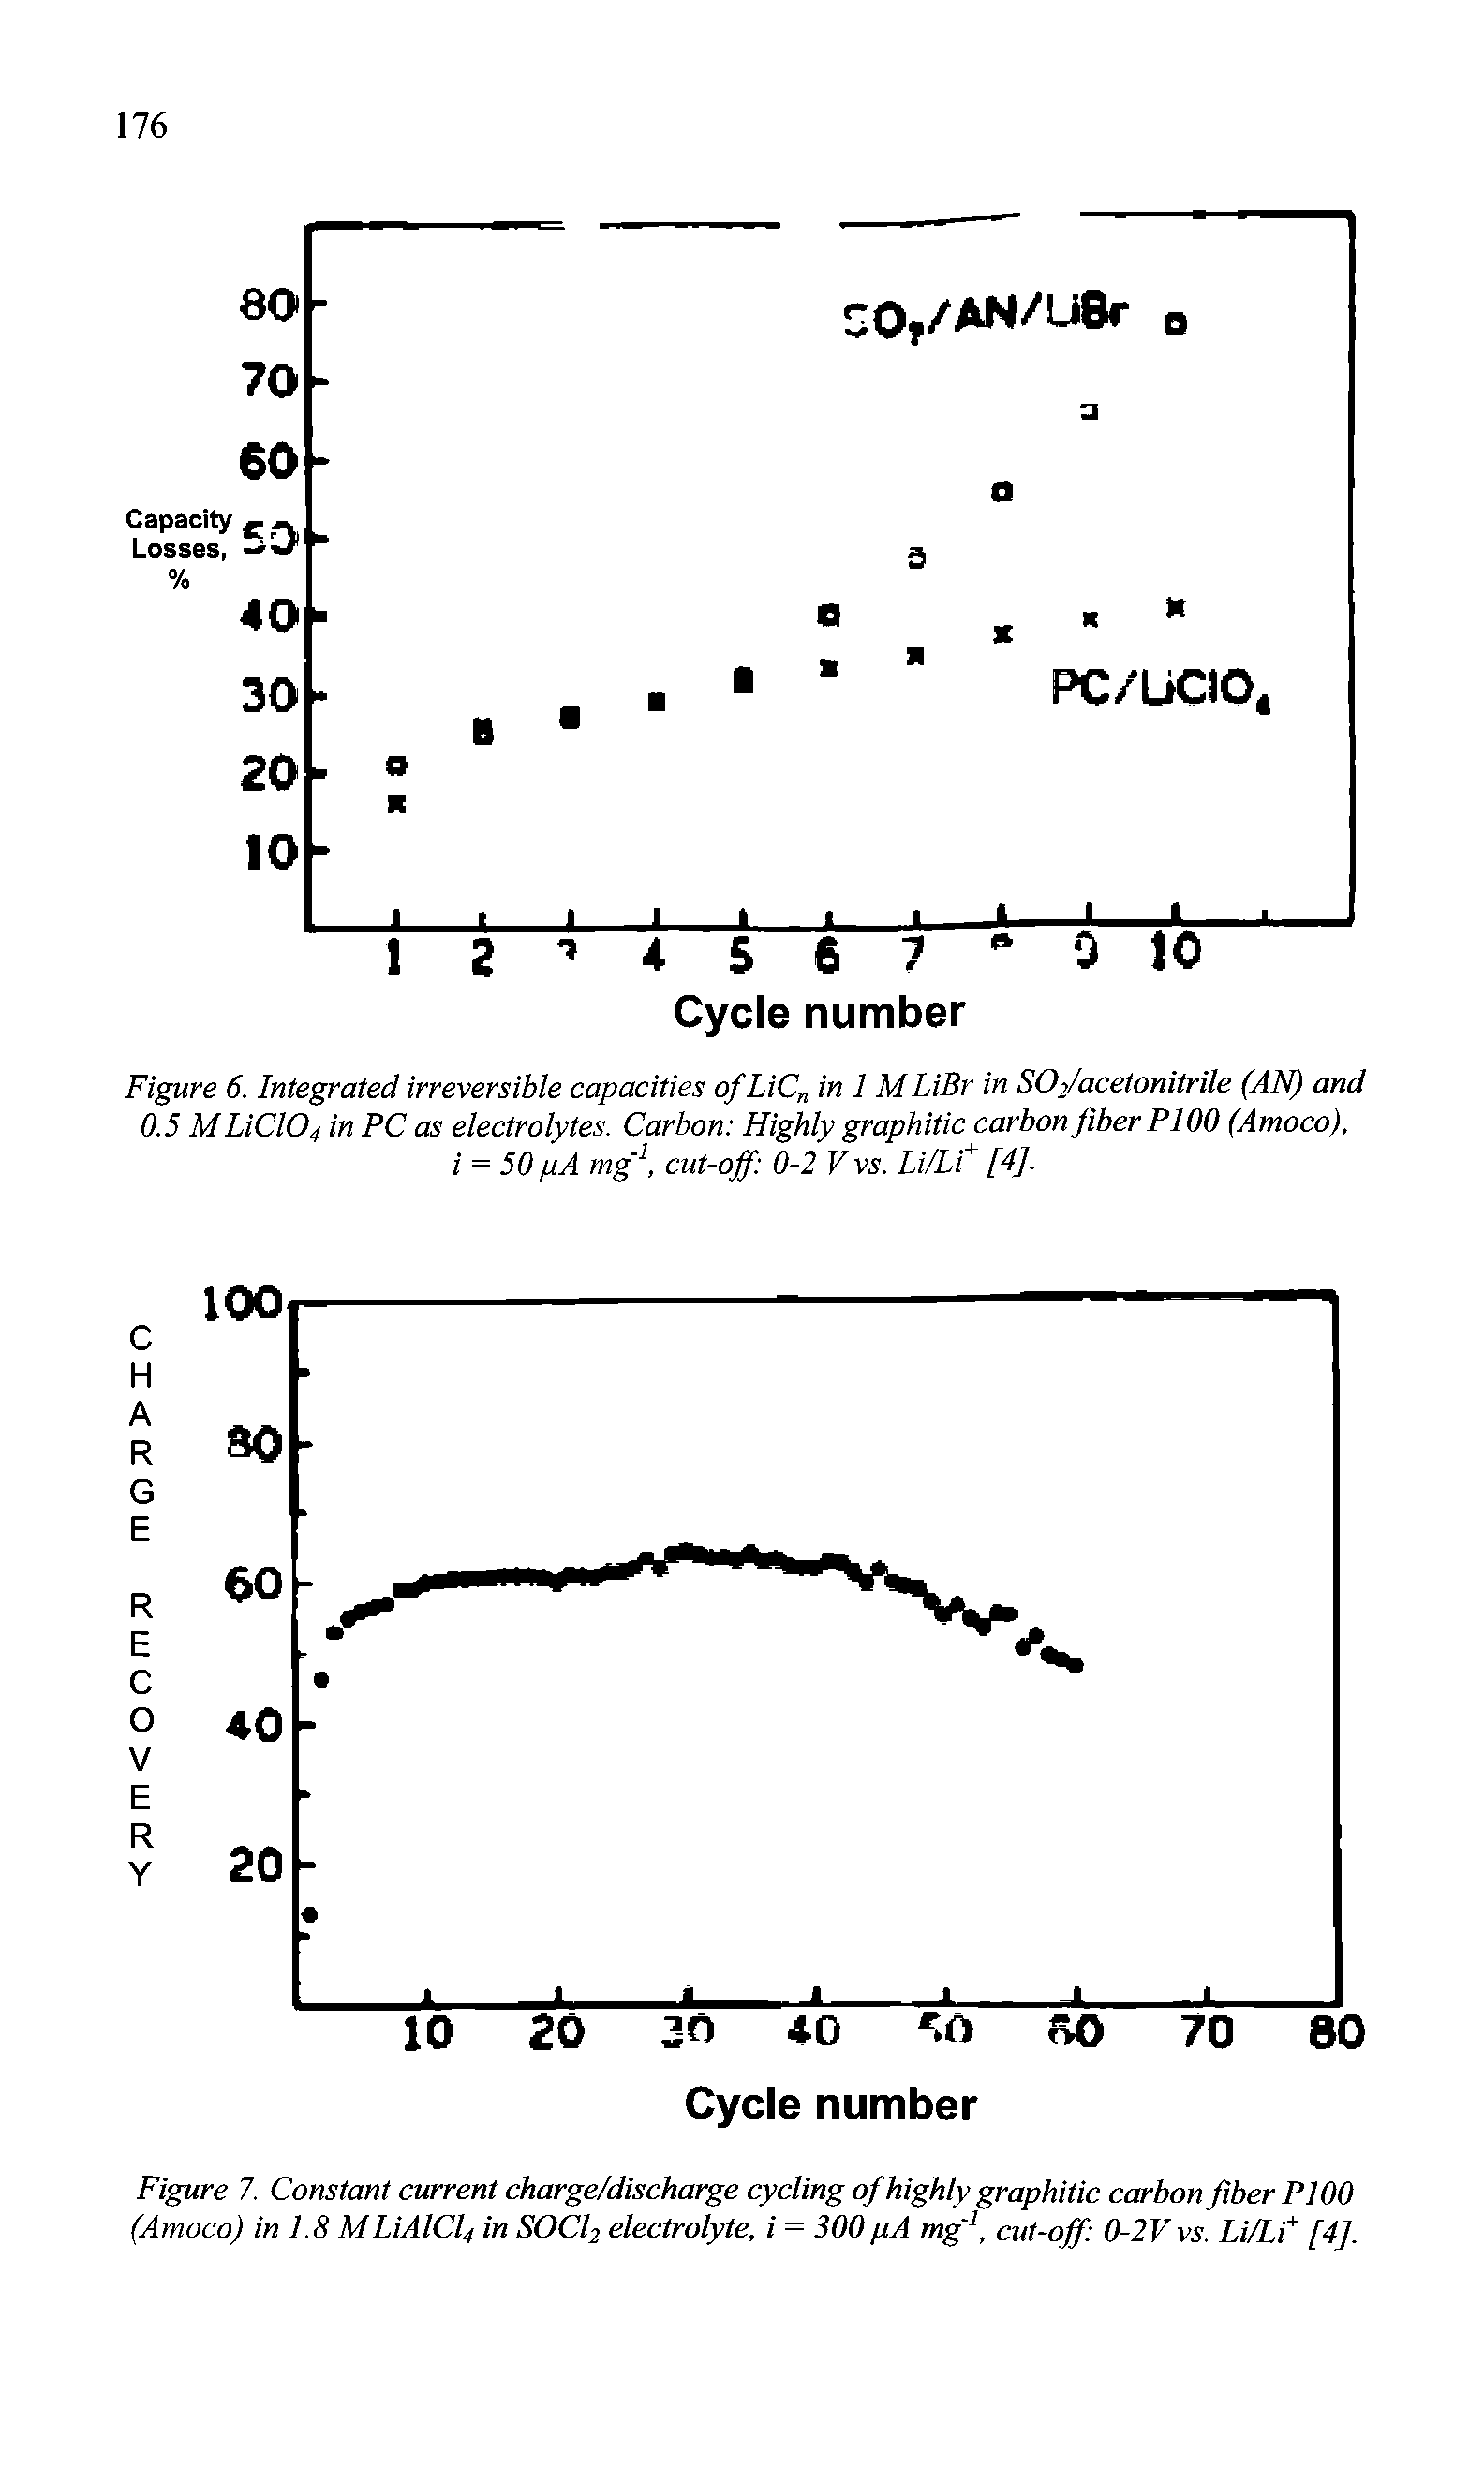 Figure 6. Integrated irreversible capacities ofLiCn in 1 MLiBr in S02/acetonitrile (AN) and 0.5 MLiClC>4 in PC as electrolytes. Carbon Highly graphitic carbon fiber PI 00 (Amoco), i = 50 pA mg 1, cut-off 0-2 V vs. Li/Li+ [4].